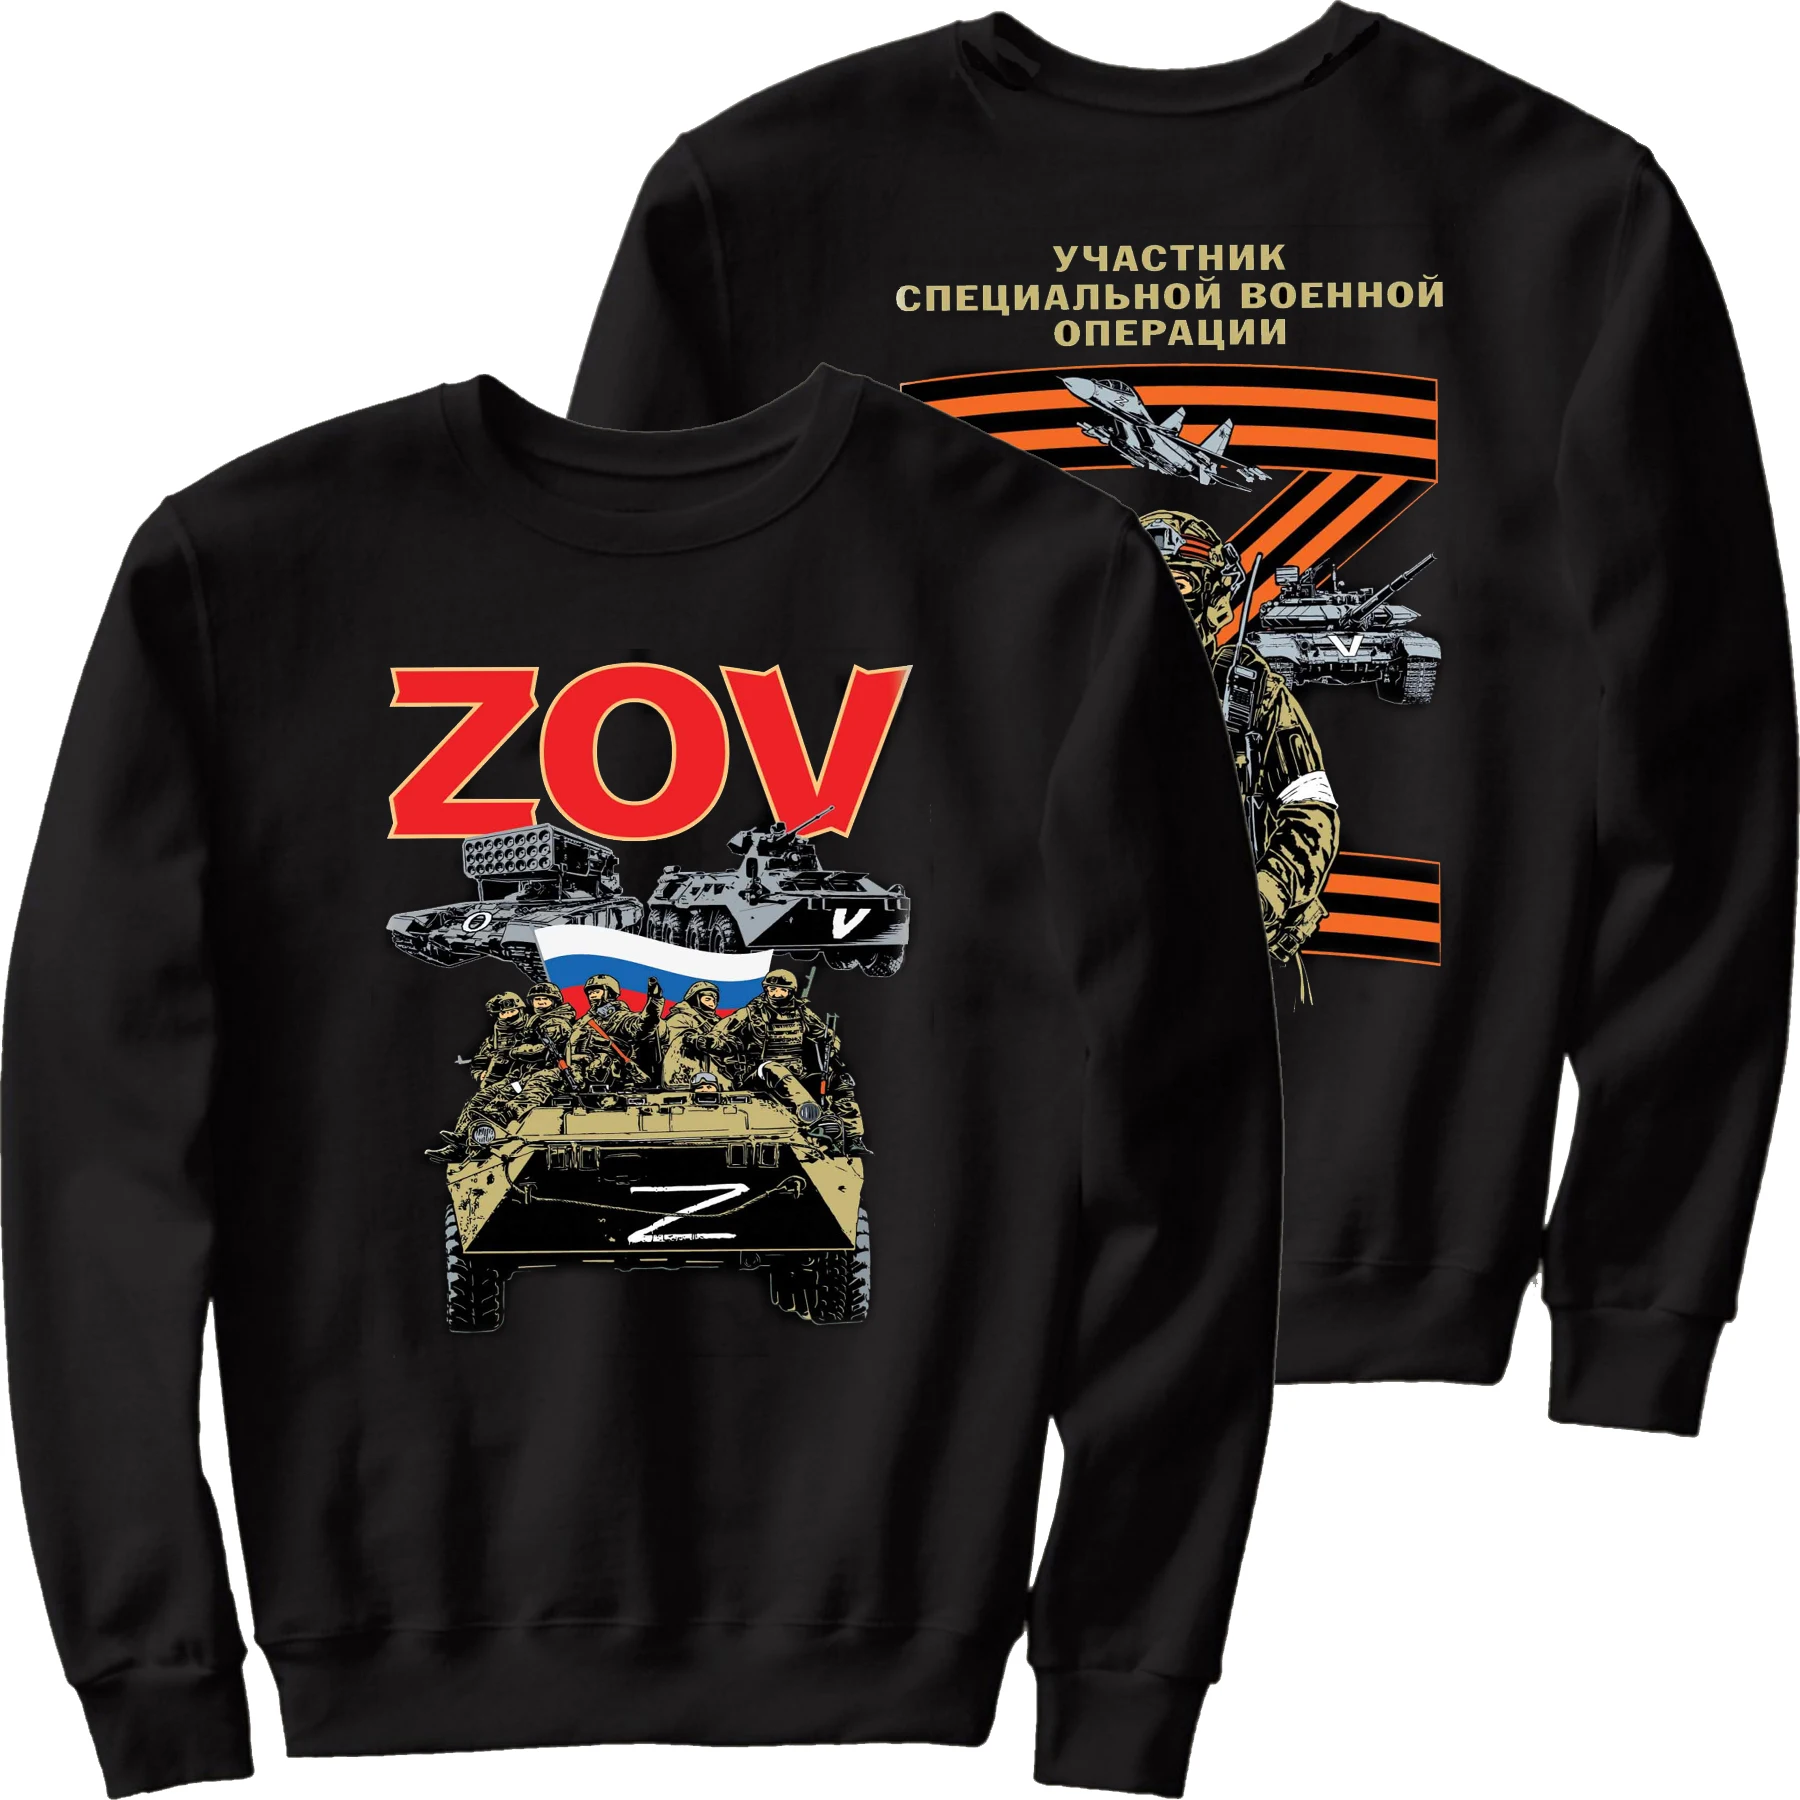 

Russian ZOV Military Operations St George Ribbon Z Warrior Sweatshirts New 100% Cotton Comfortable Casual Mens Clothing